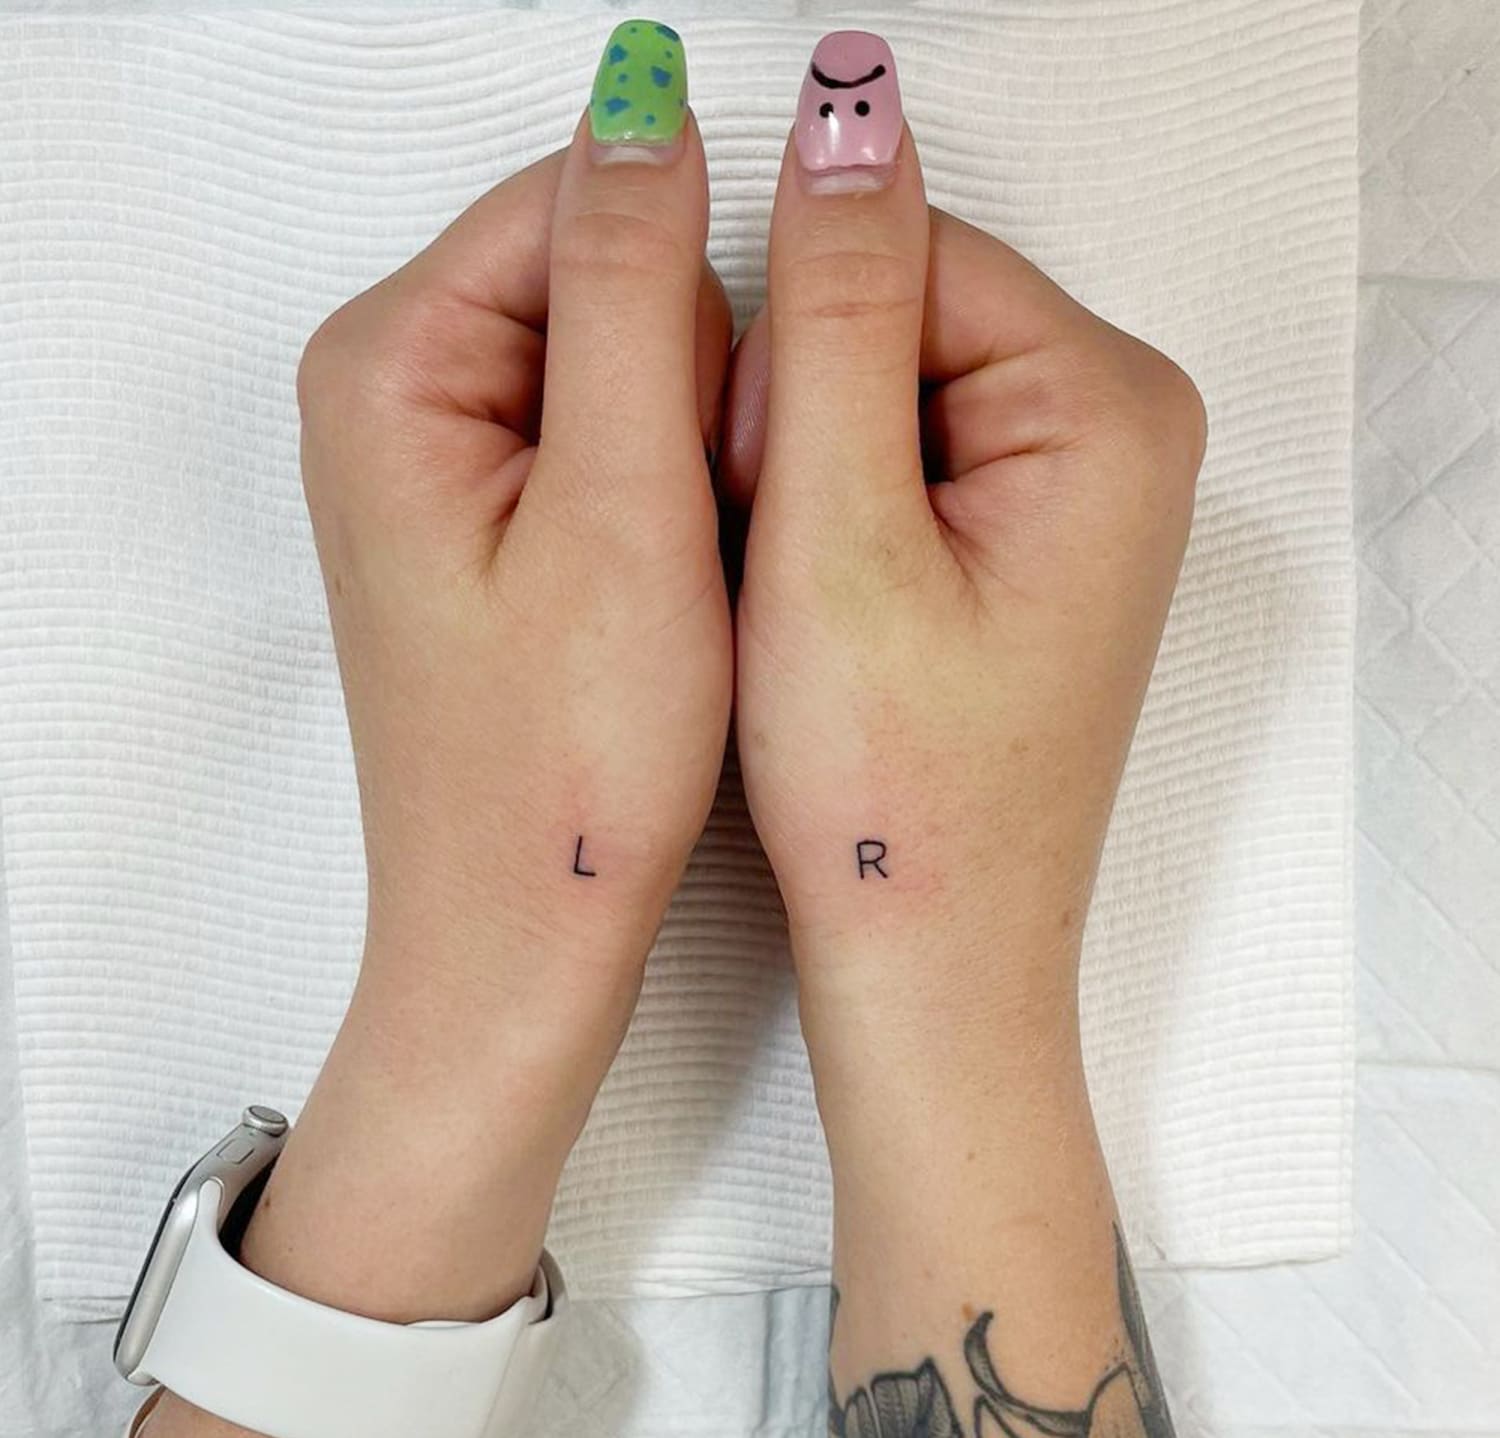 Why some people have trouble distinguishing left from right: Woman gets  tattoos